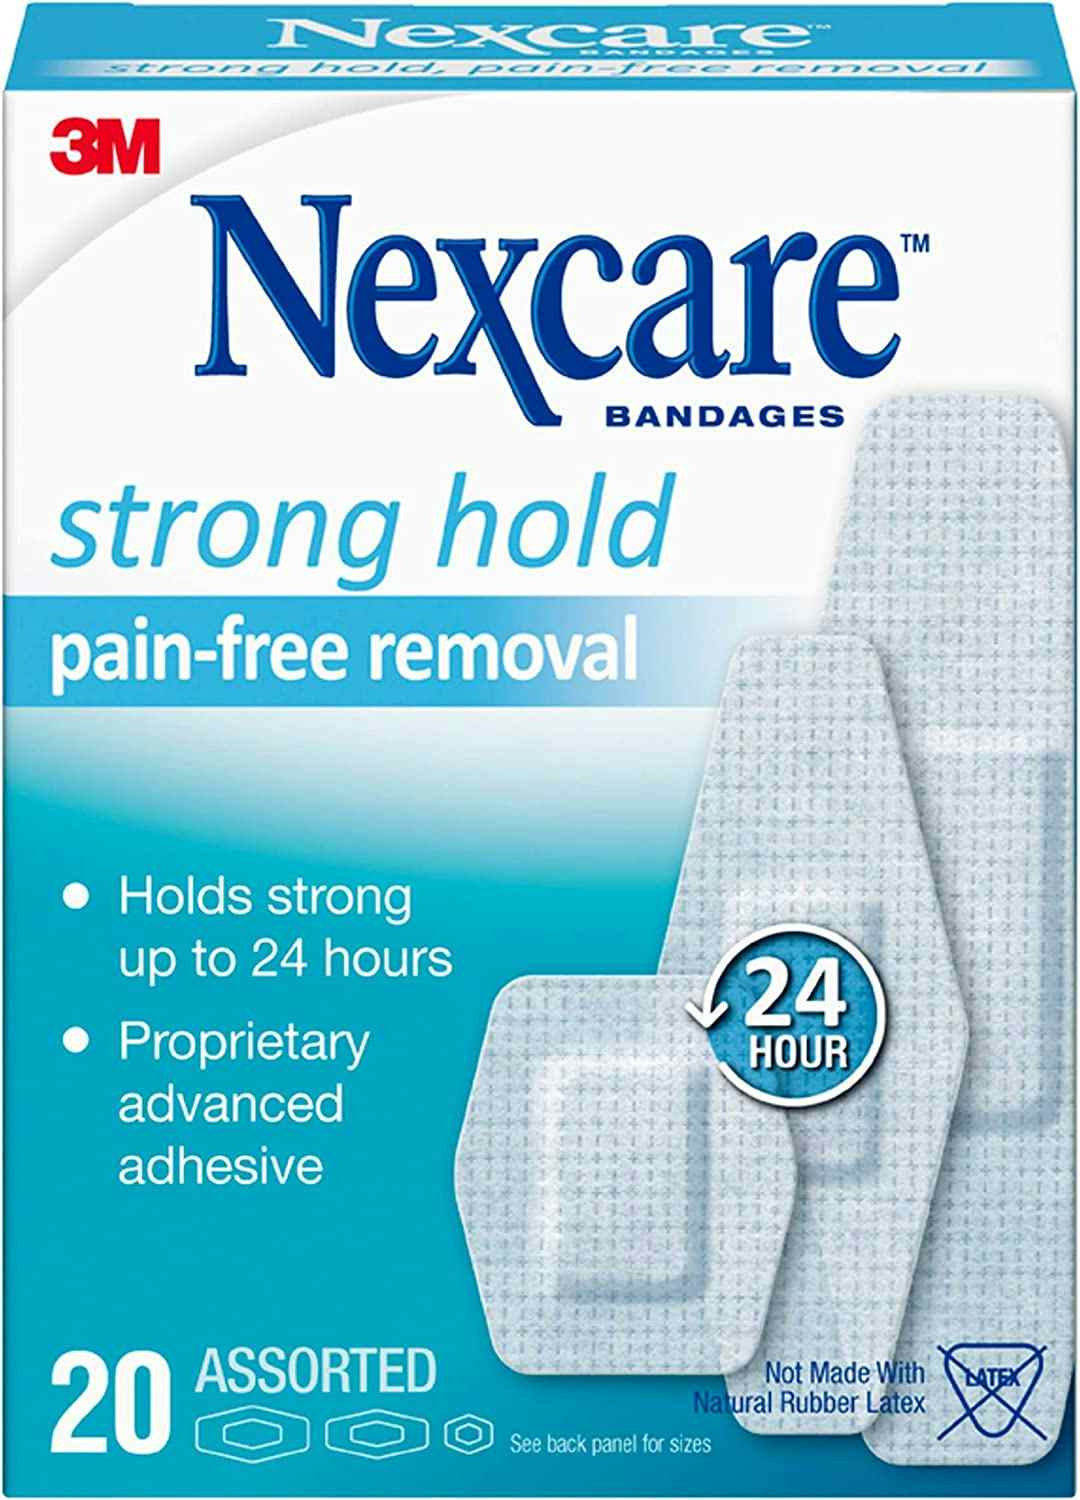 3M Nexcare Pain-Free Removal Sensitive Skin Bandages, Assorted Sizes